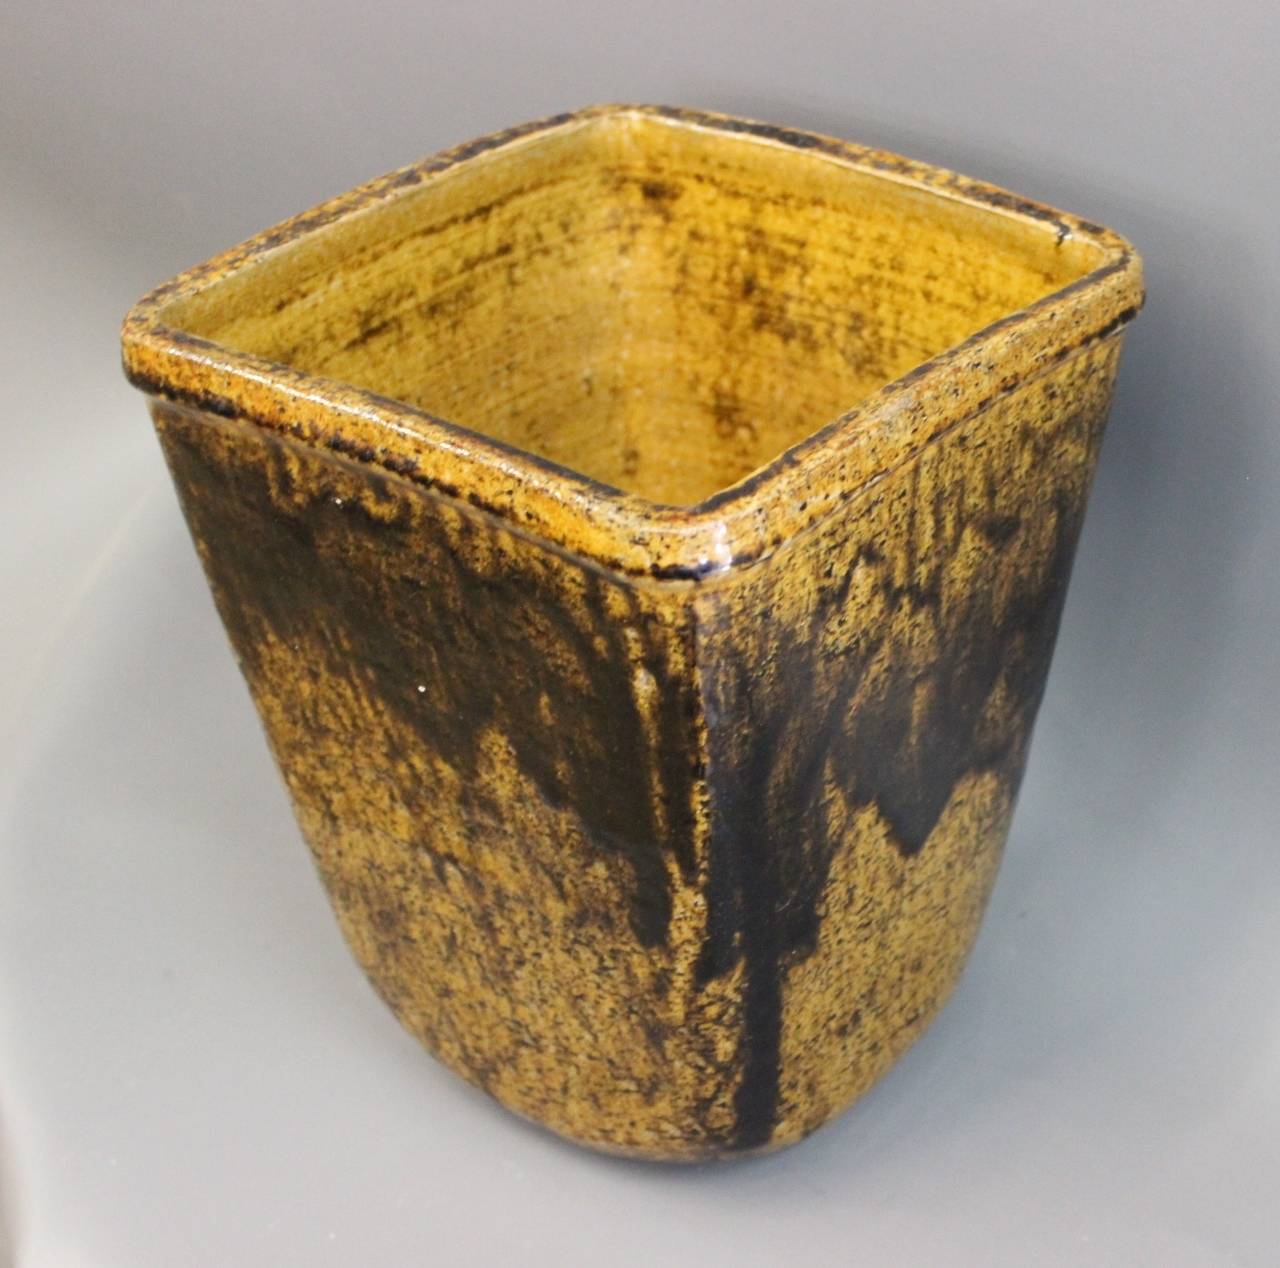 Glazed Ceramic Bowl in Brown, Yellow and Green Glaze, Manufactured circa 1950s